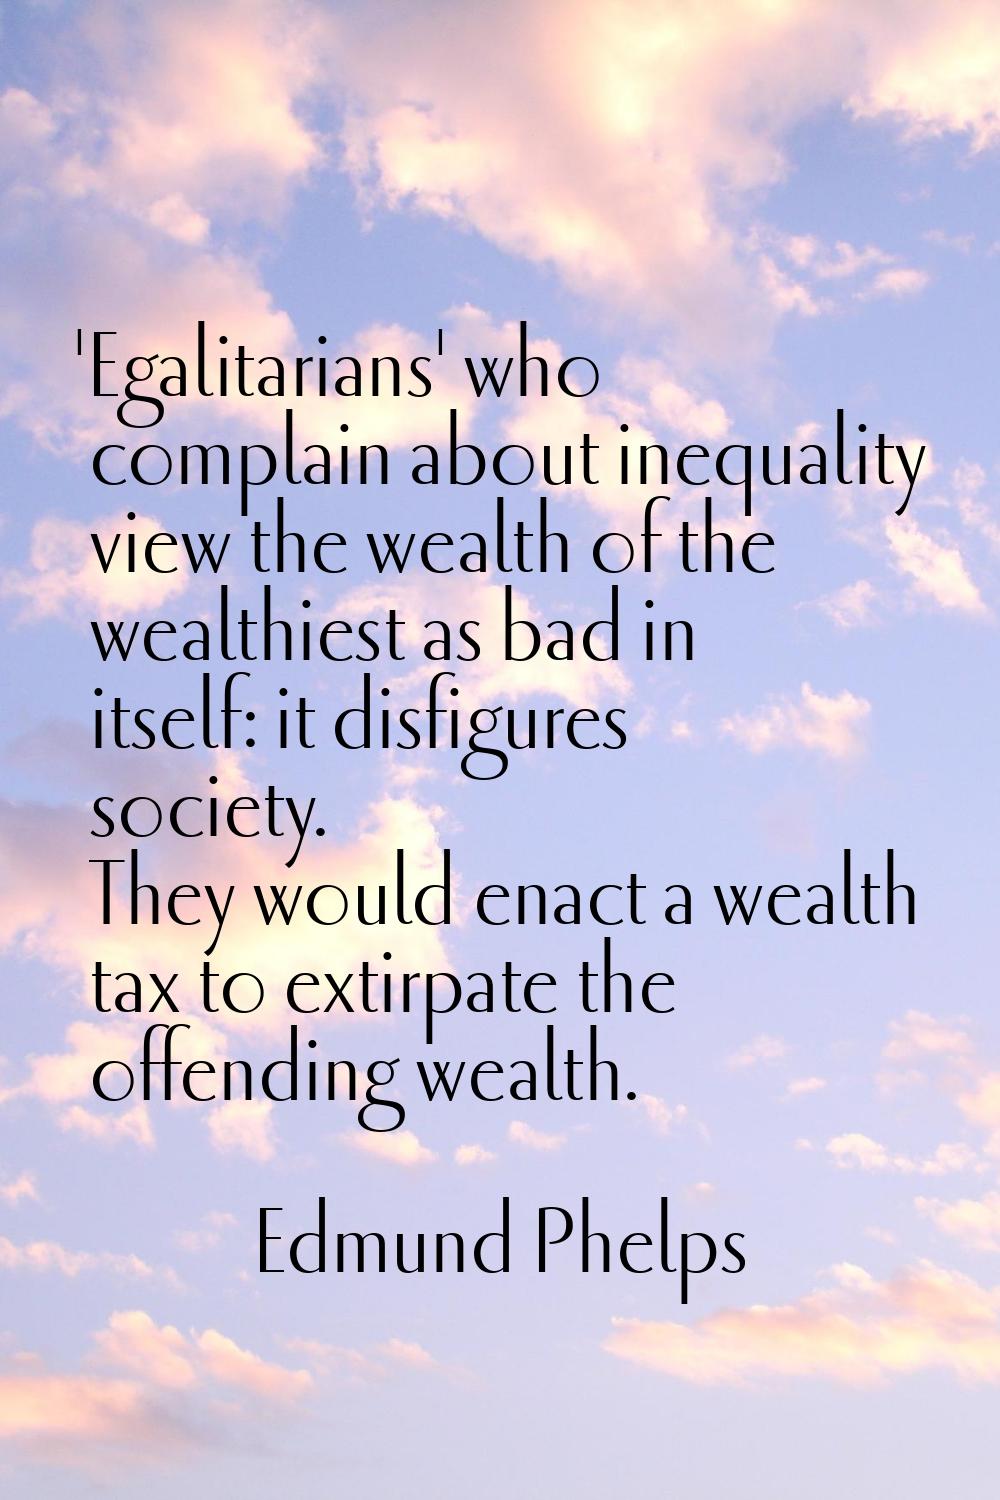 'Egalitarians' who complain about inequality view the wealth of the wealthiest as bad in itself: it